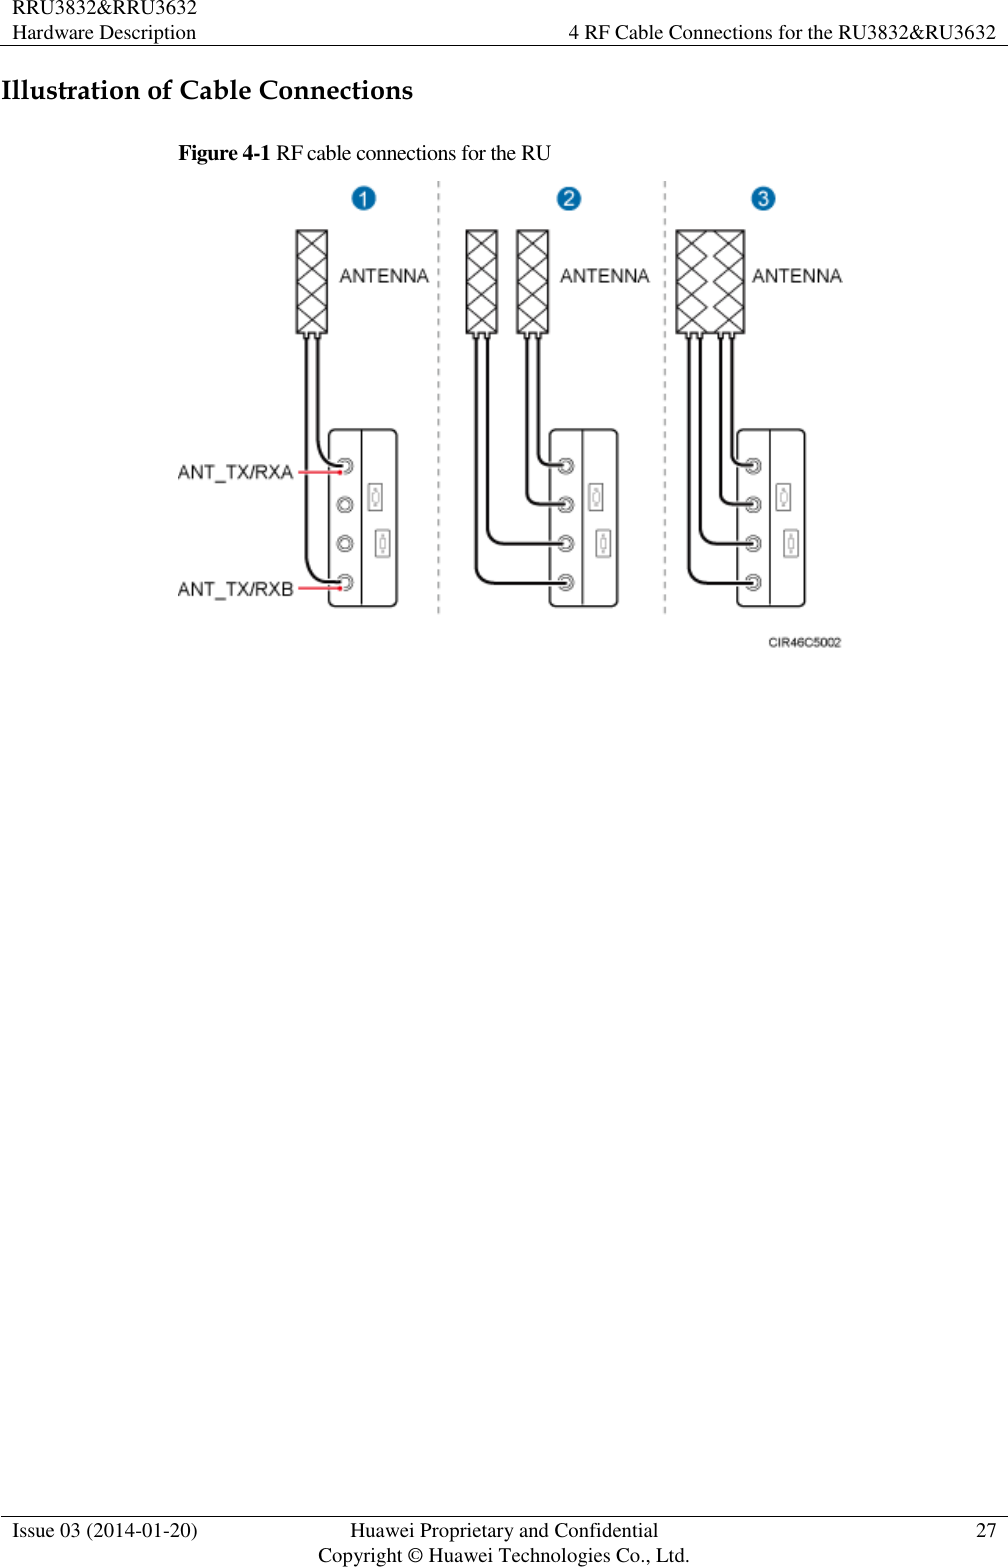 RRU3832&amp;RRU3632 Hardware Description 4 RF Cable Connections for the RU3832&amp;RU3632  Issue 03 (2014-01-20) Huawei Proprietary and Confidential                                     Copyright © Huawei Technologies Co., Ltd. 27  Illustration of Cable Connections Figure 4-1 RF cable connections for the RU  